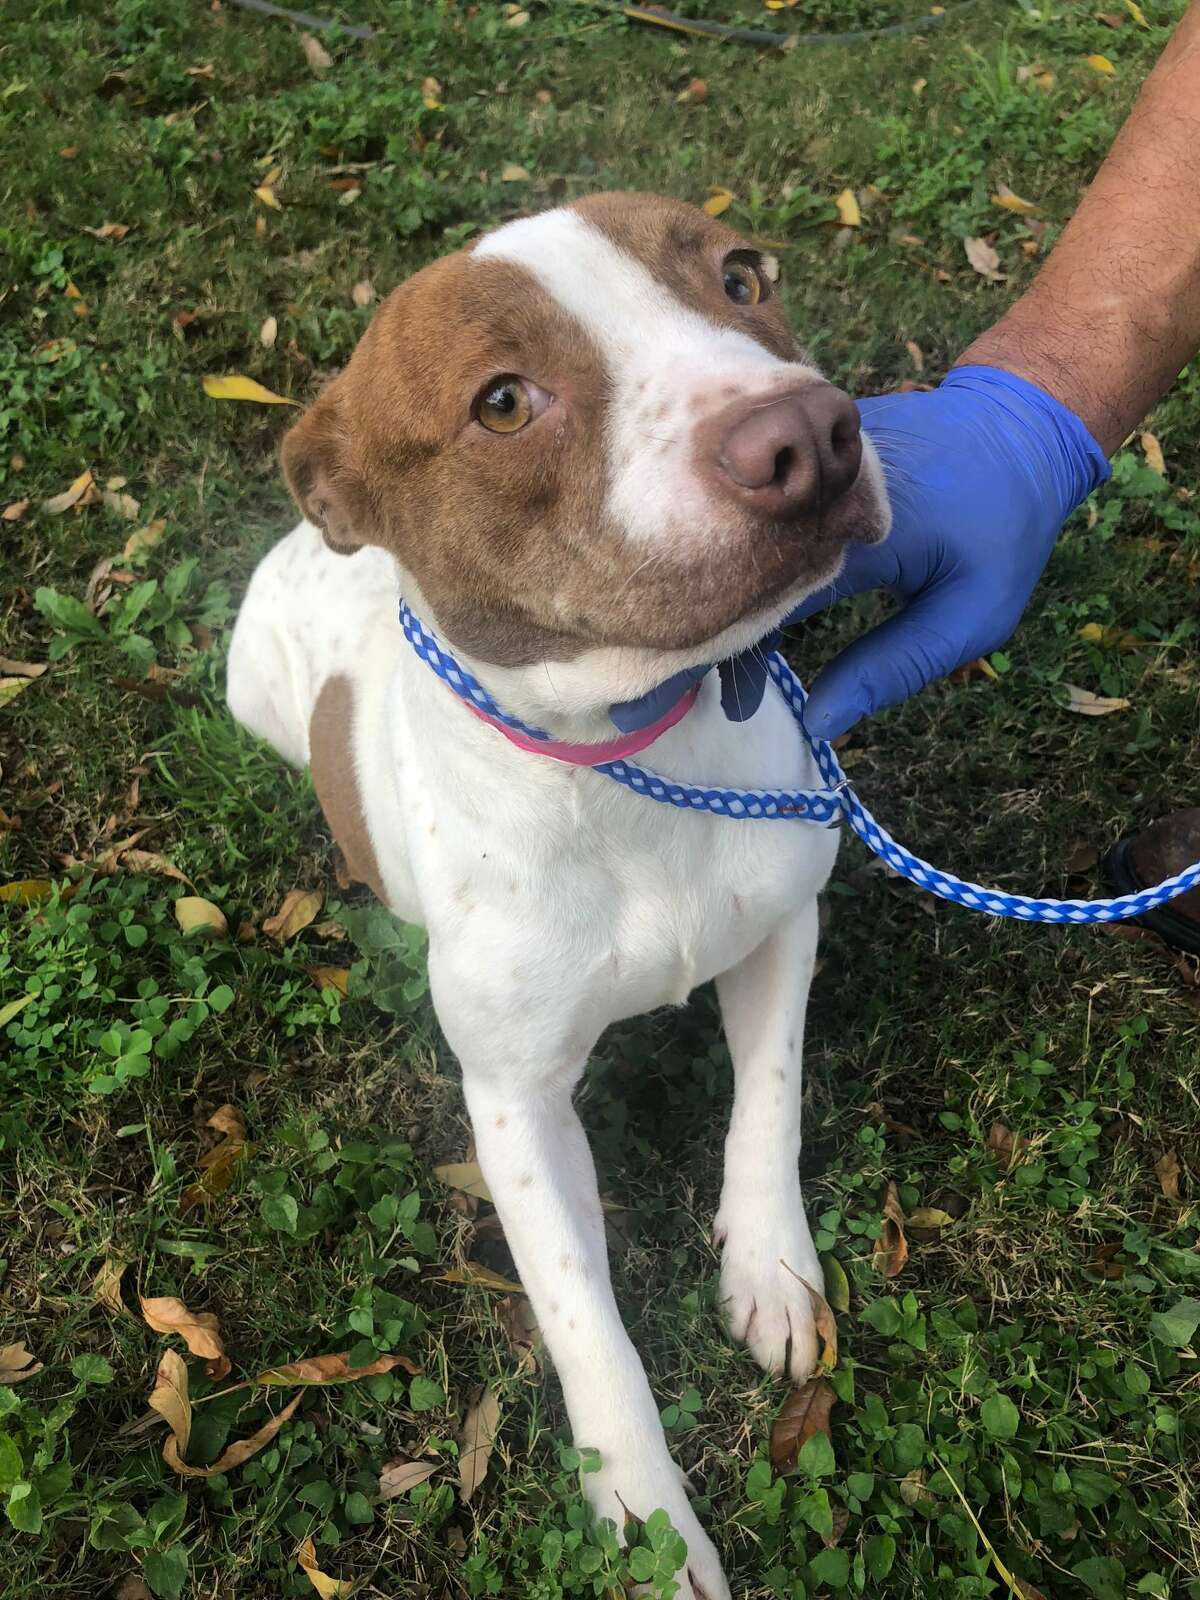 Riley: Hi, I’m Riley. I’ve been at the shelter since 12/17/18. I am a female pitbull mix and I am 2 years old. I weigh 27.6 pounds and am negative for all canine diseases. I’ve been microchipped, de-wormed and I am vaccinated against rabies. I’m up to date on all other vaccines and I am currently in search of my forever home. I don’t do well on a leash, but I like to be carried. I have a lot of love to give and enjoy being pet. Come visit me today! My ID number is #113249.